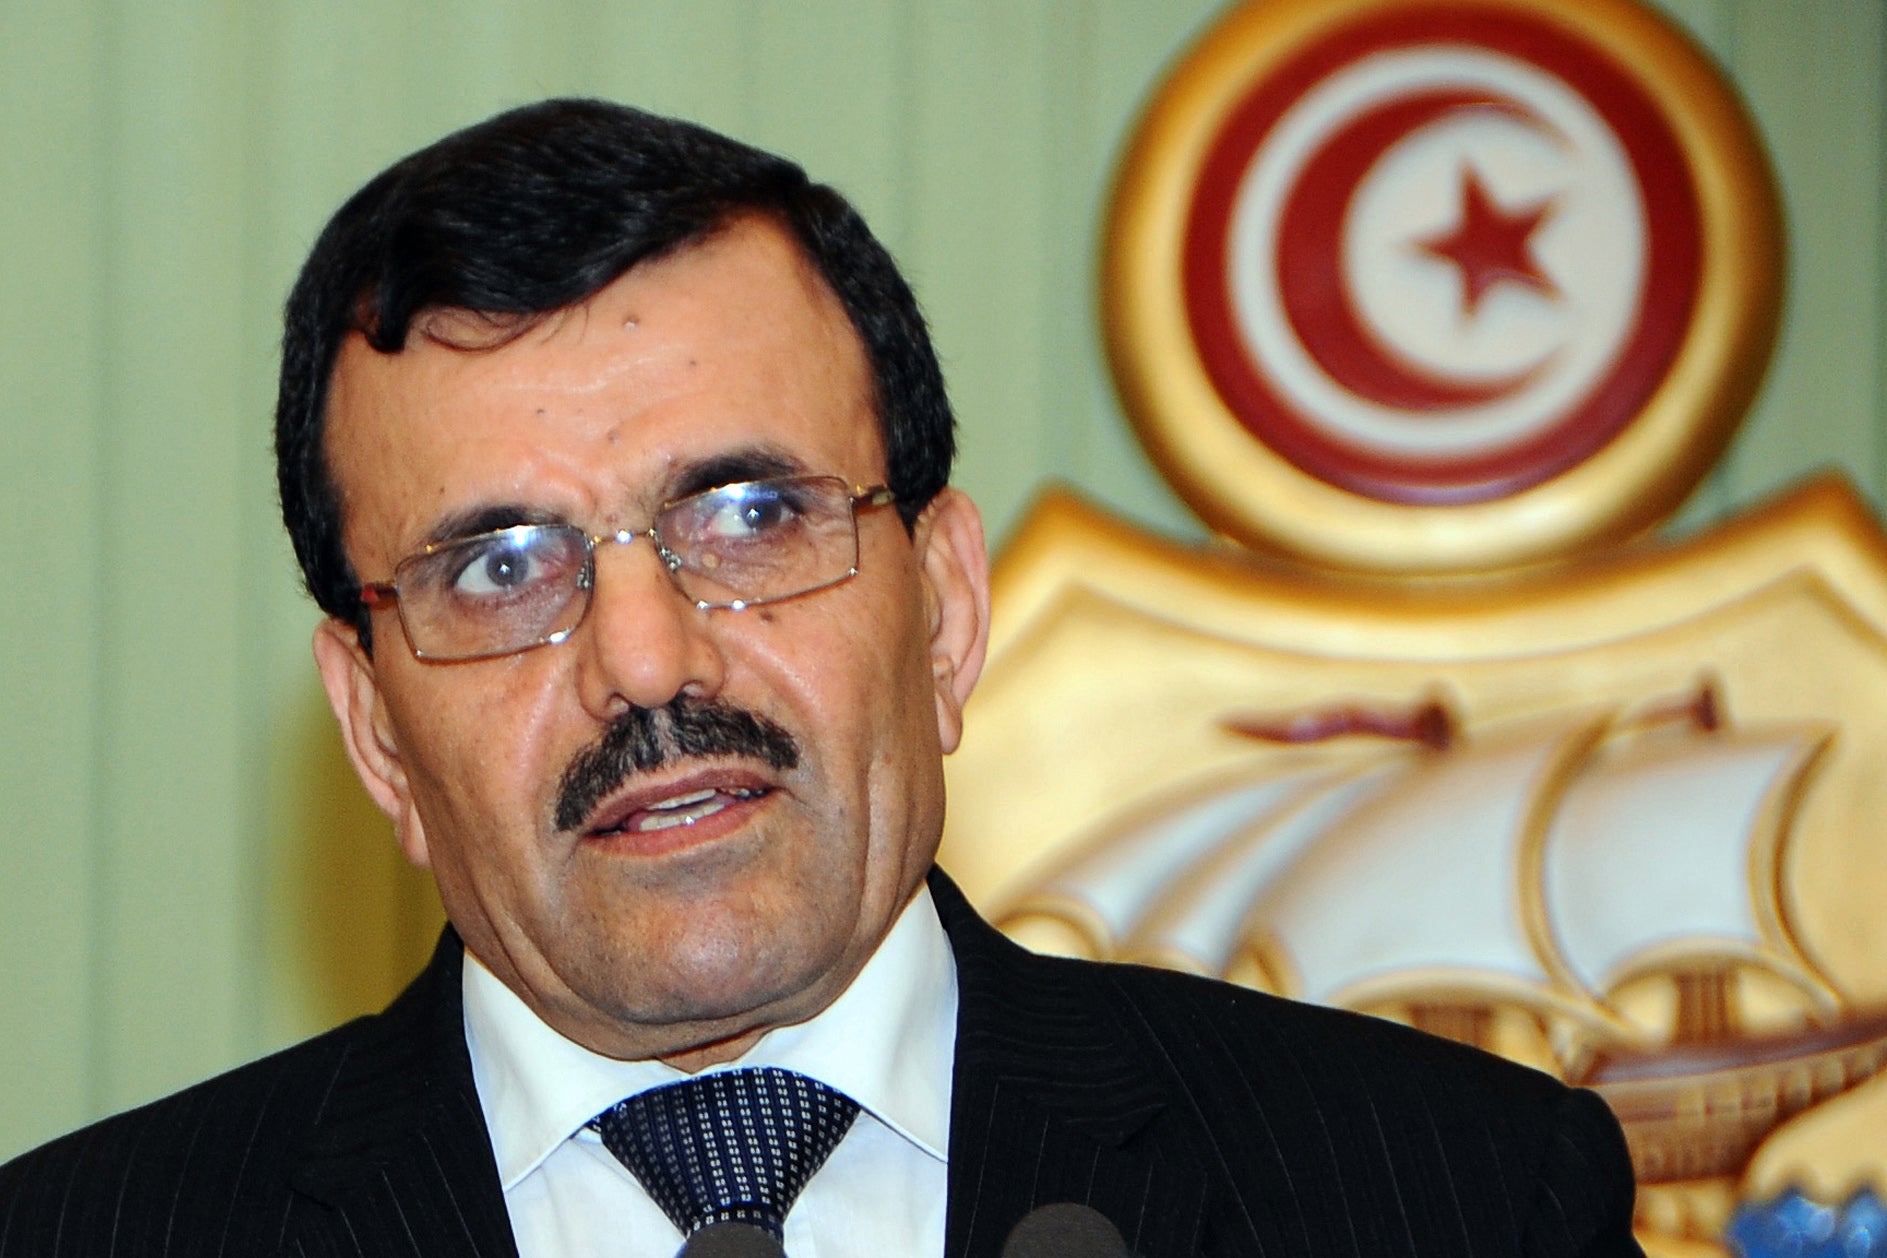 Then-prime minister of Tunisia, Ali Laarayedh, delivers a speech during a news conference in Tunis, February 22, 2013.